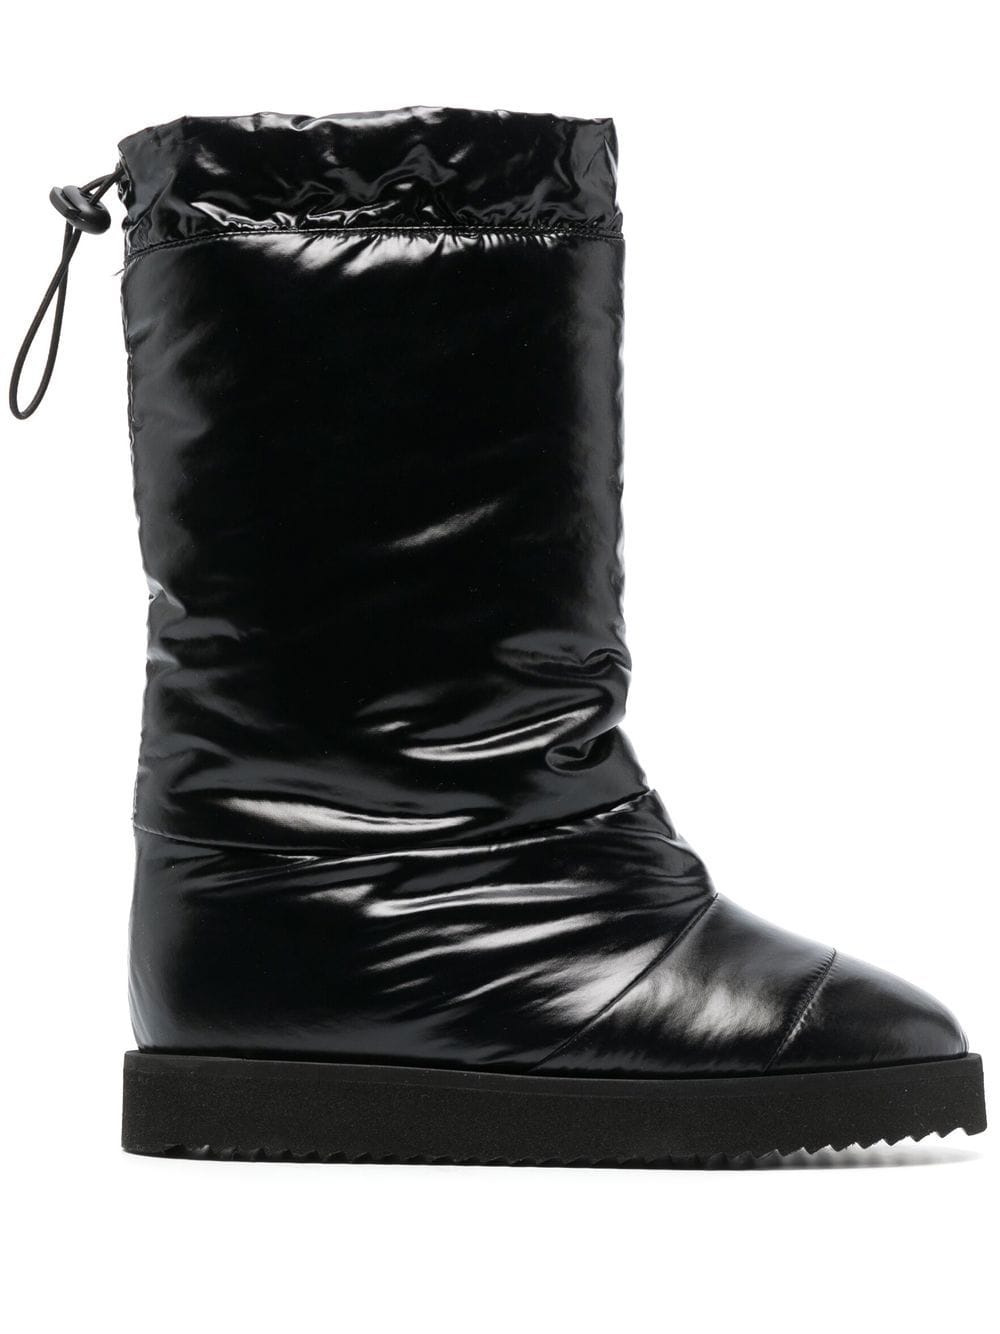 GIABORGHINI patent padded knee-high boots